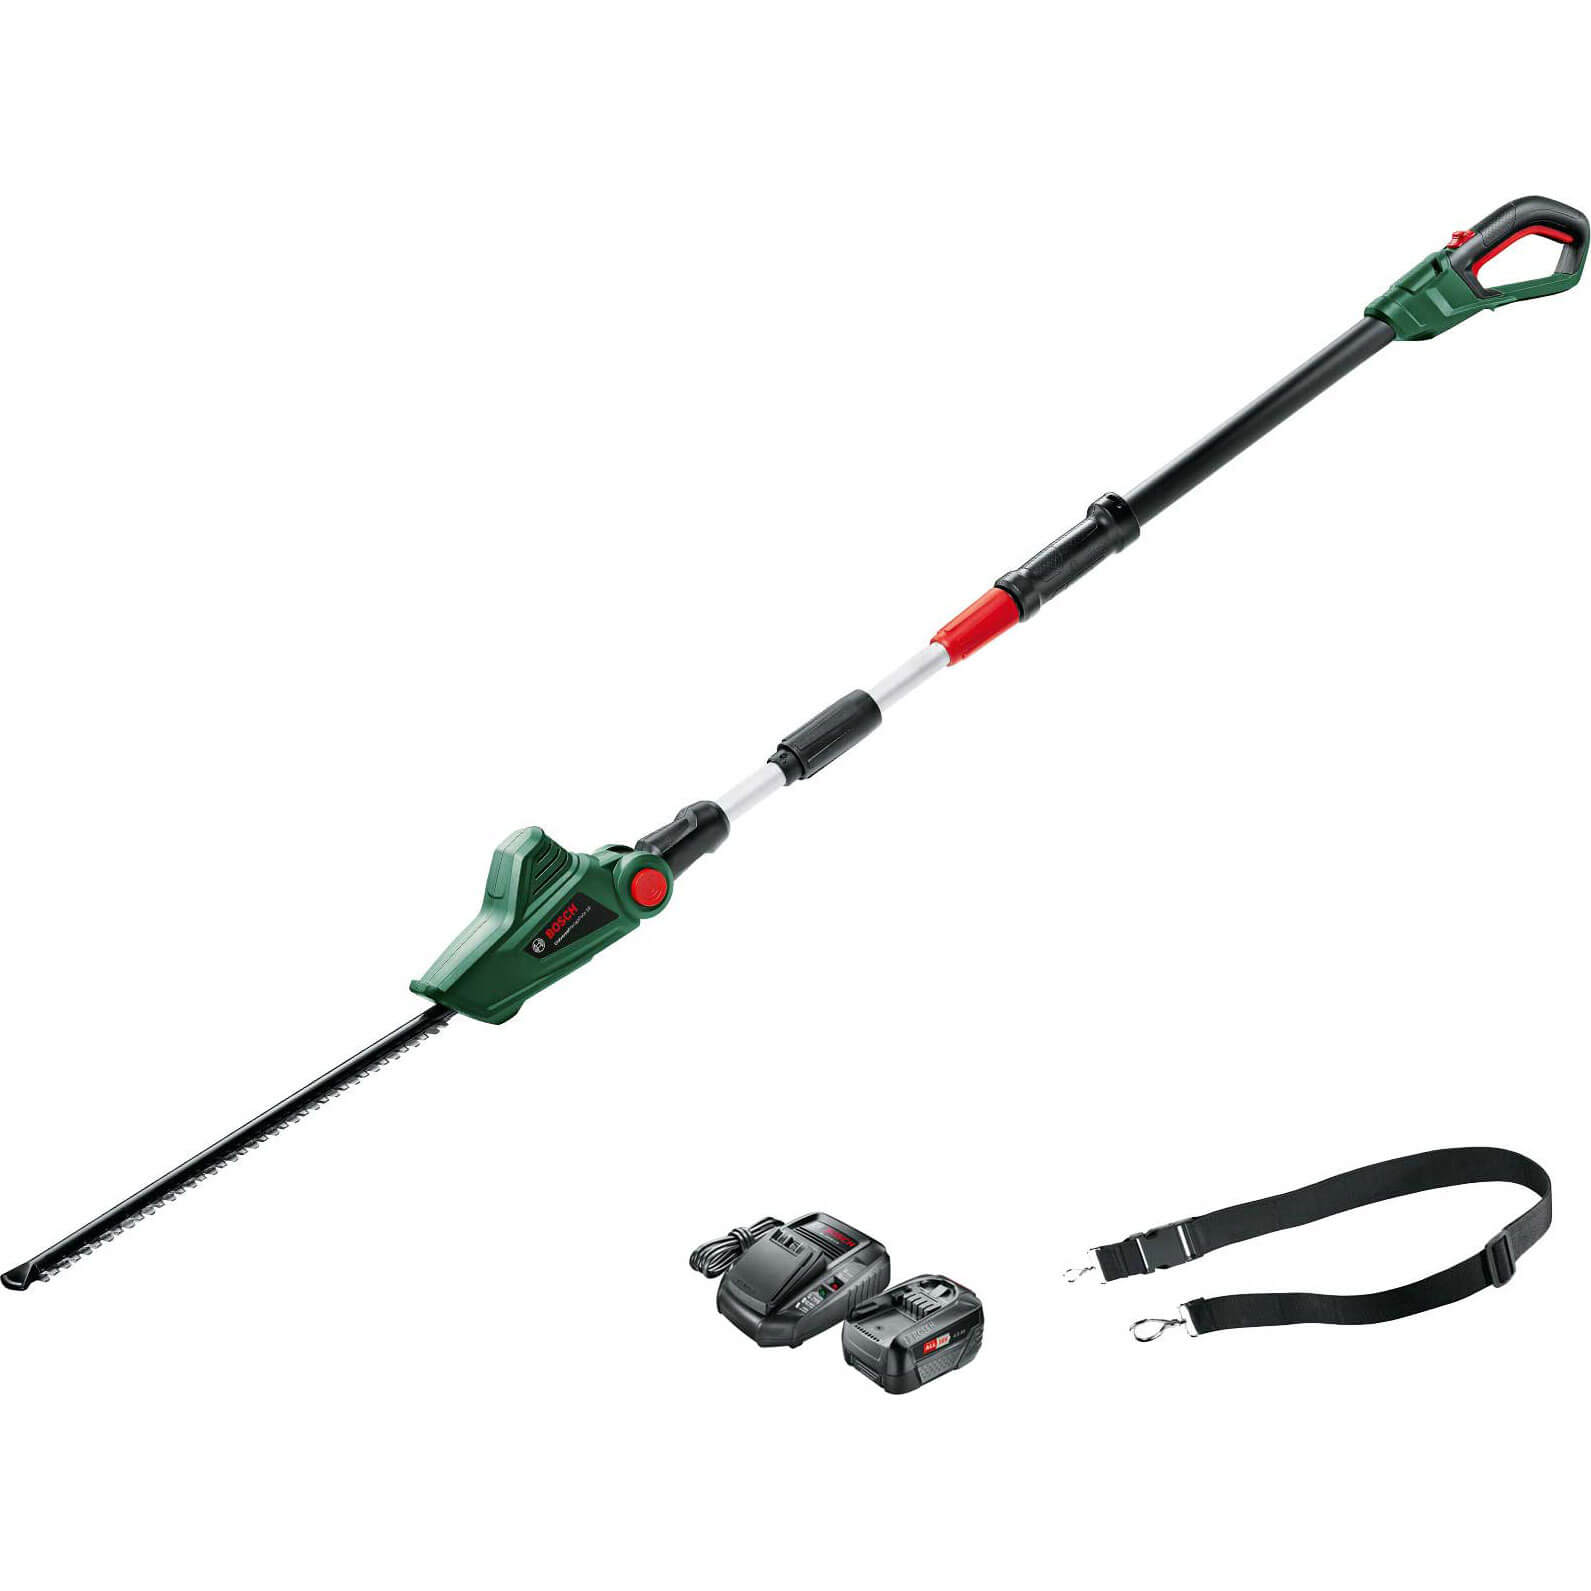 Image of Bosch UNIVERSALHEDGEPOLE 18v Cordless Telescopic Pole Hedge Trimmer 430mm 1 x 4ah Li-ion Charger